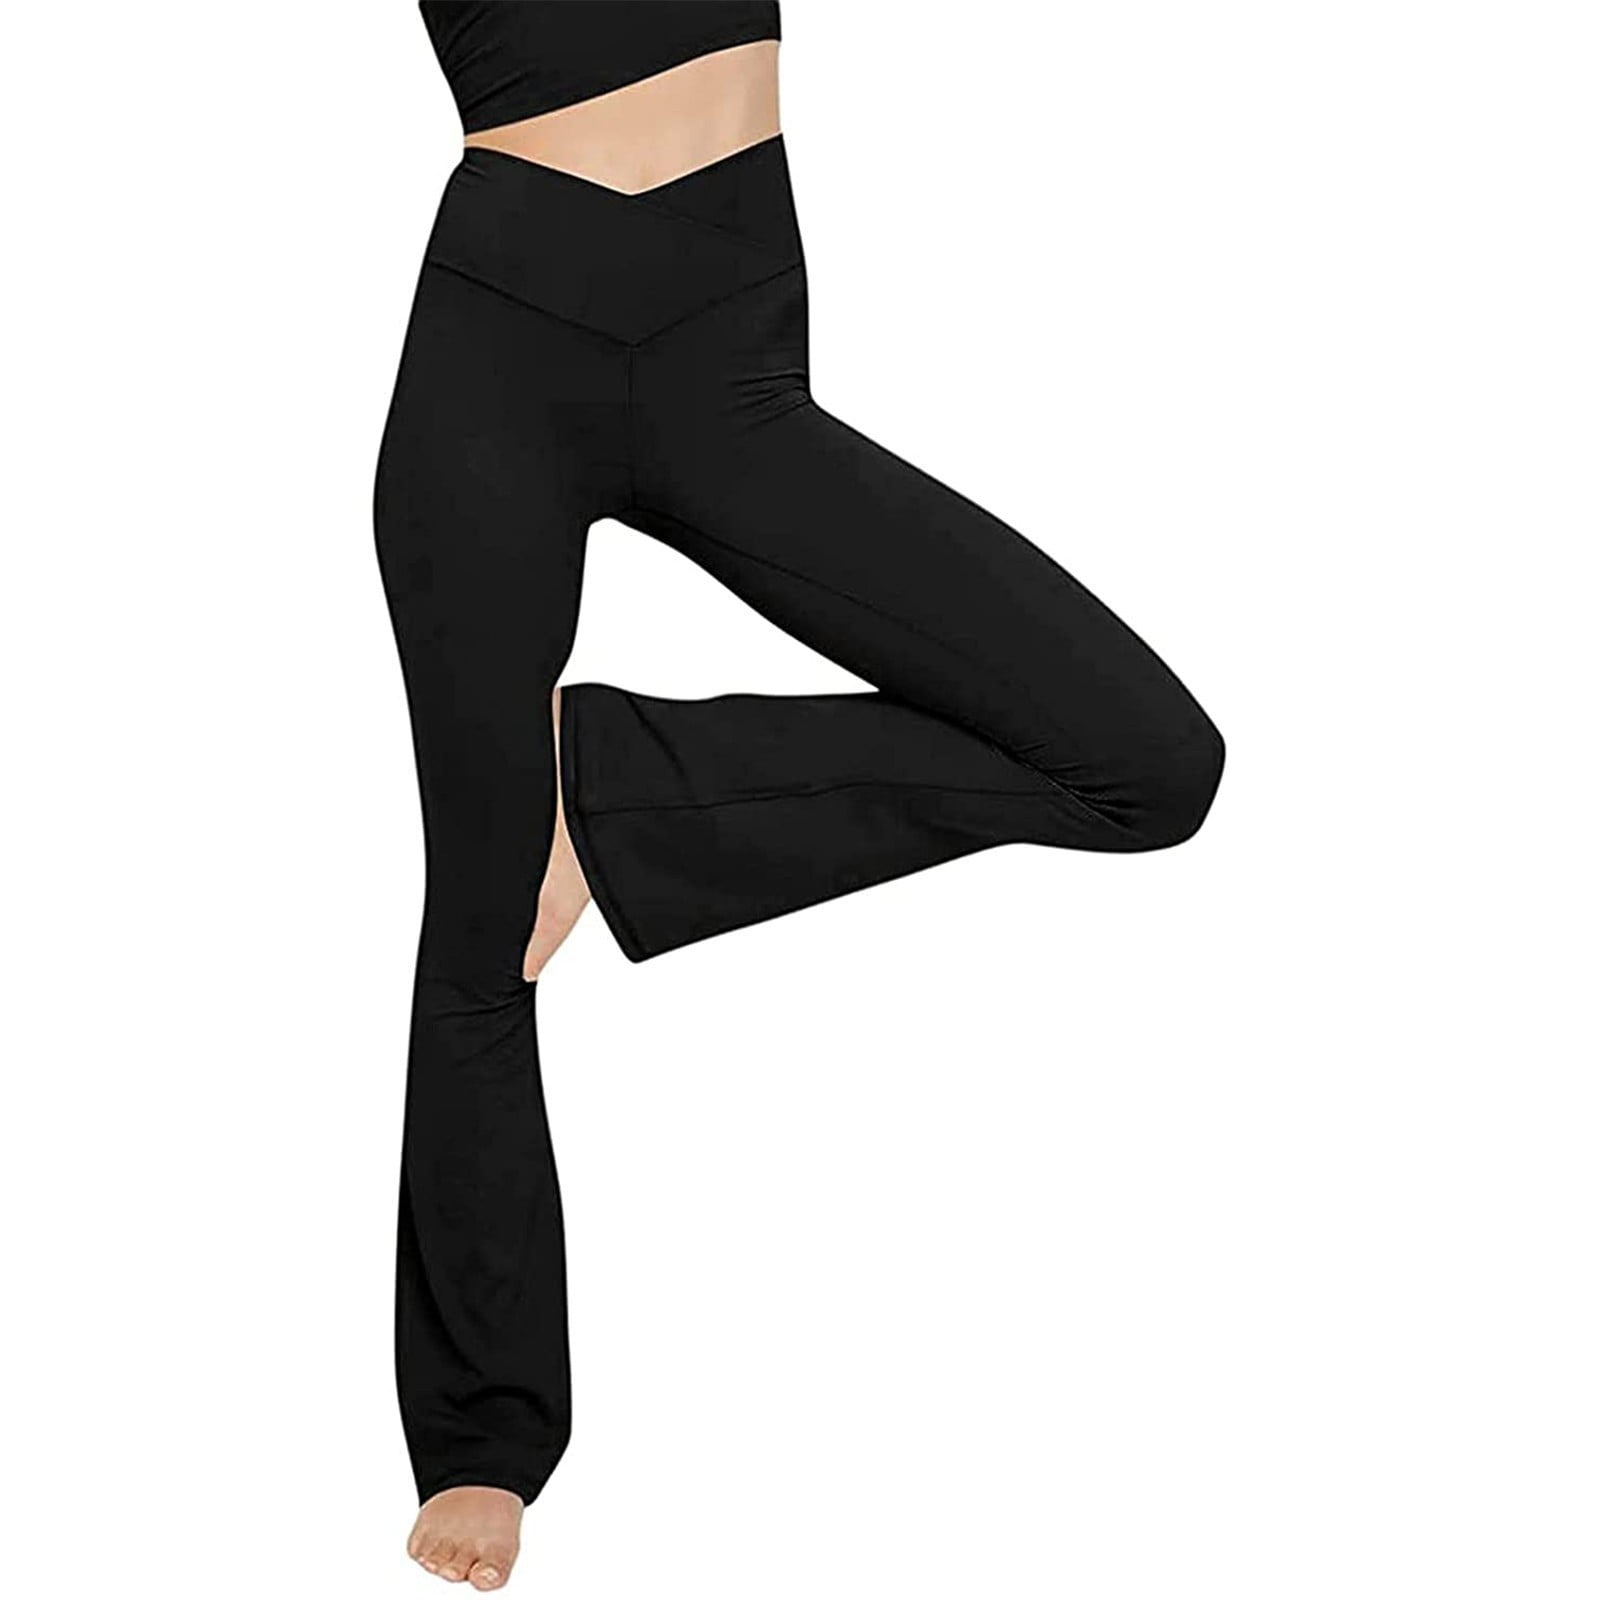  ZDRZK Daily Deals Cotton Leggings for Women Bodycon Slimming  Workout Trouser Leggings Pants Many Colors Soft Quick-Drying Bottoms Womens  Flare Leggings Black S : Sports & Outdoors